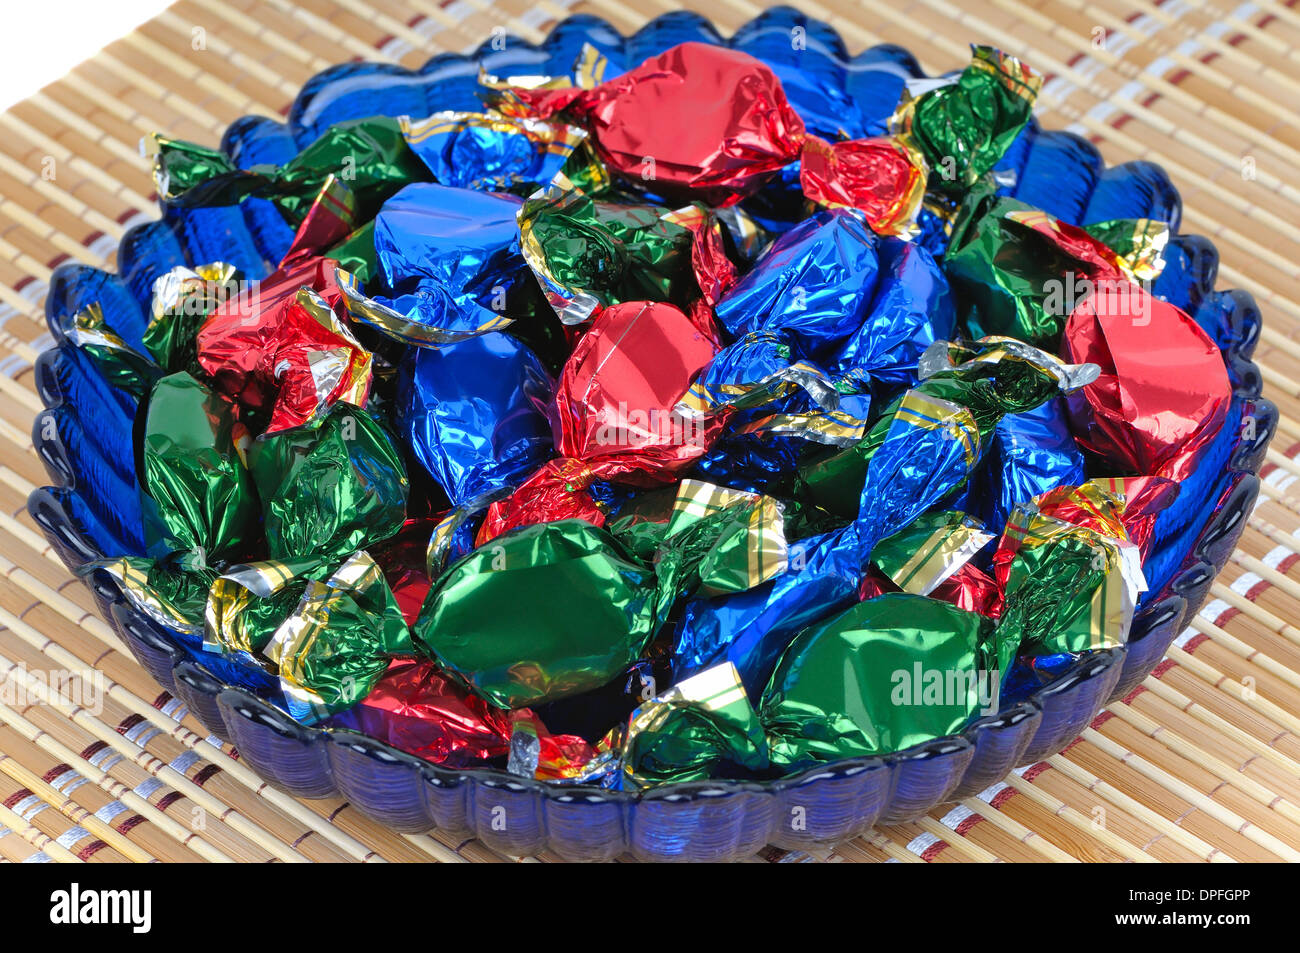 Chocolate candy with wrappers of different colors in the glass blue dish Stock Photo